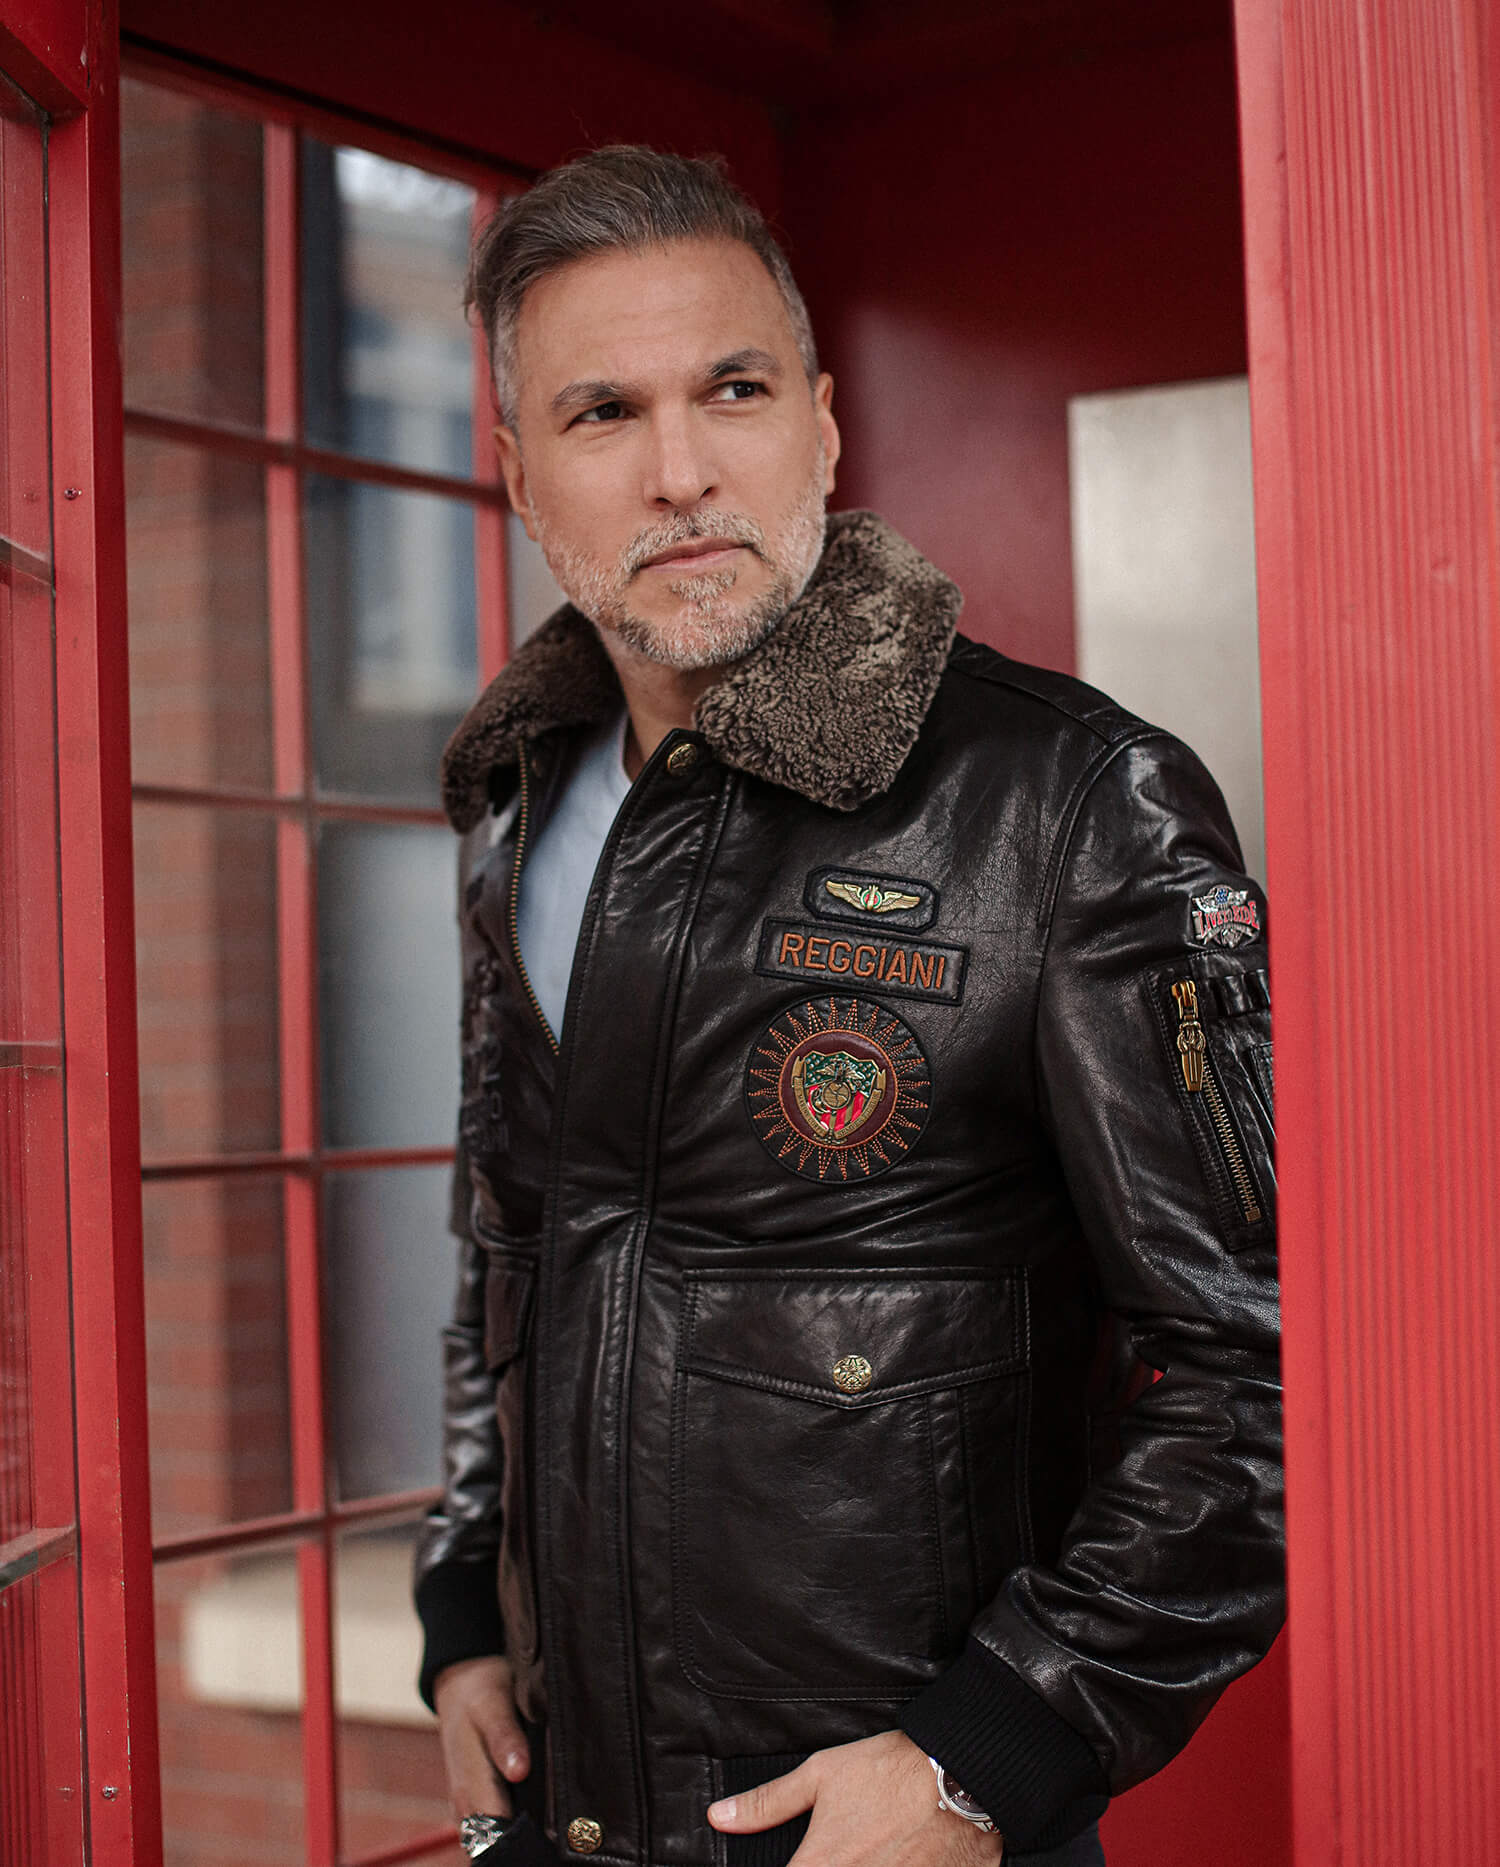 Mens Leather Bomber Jacket with Fur Collar - PalaLeather